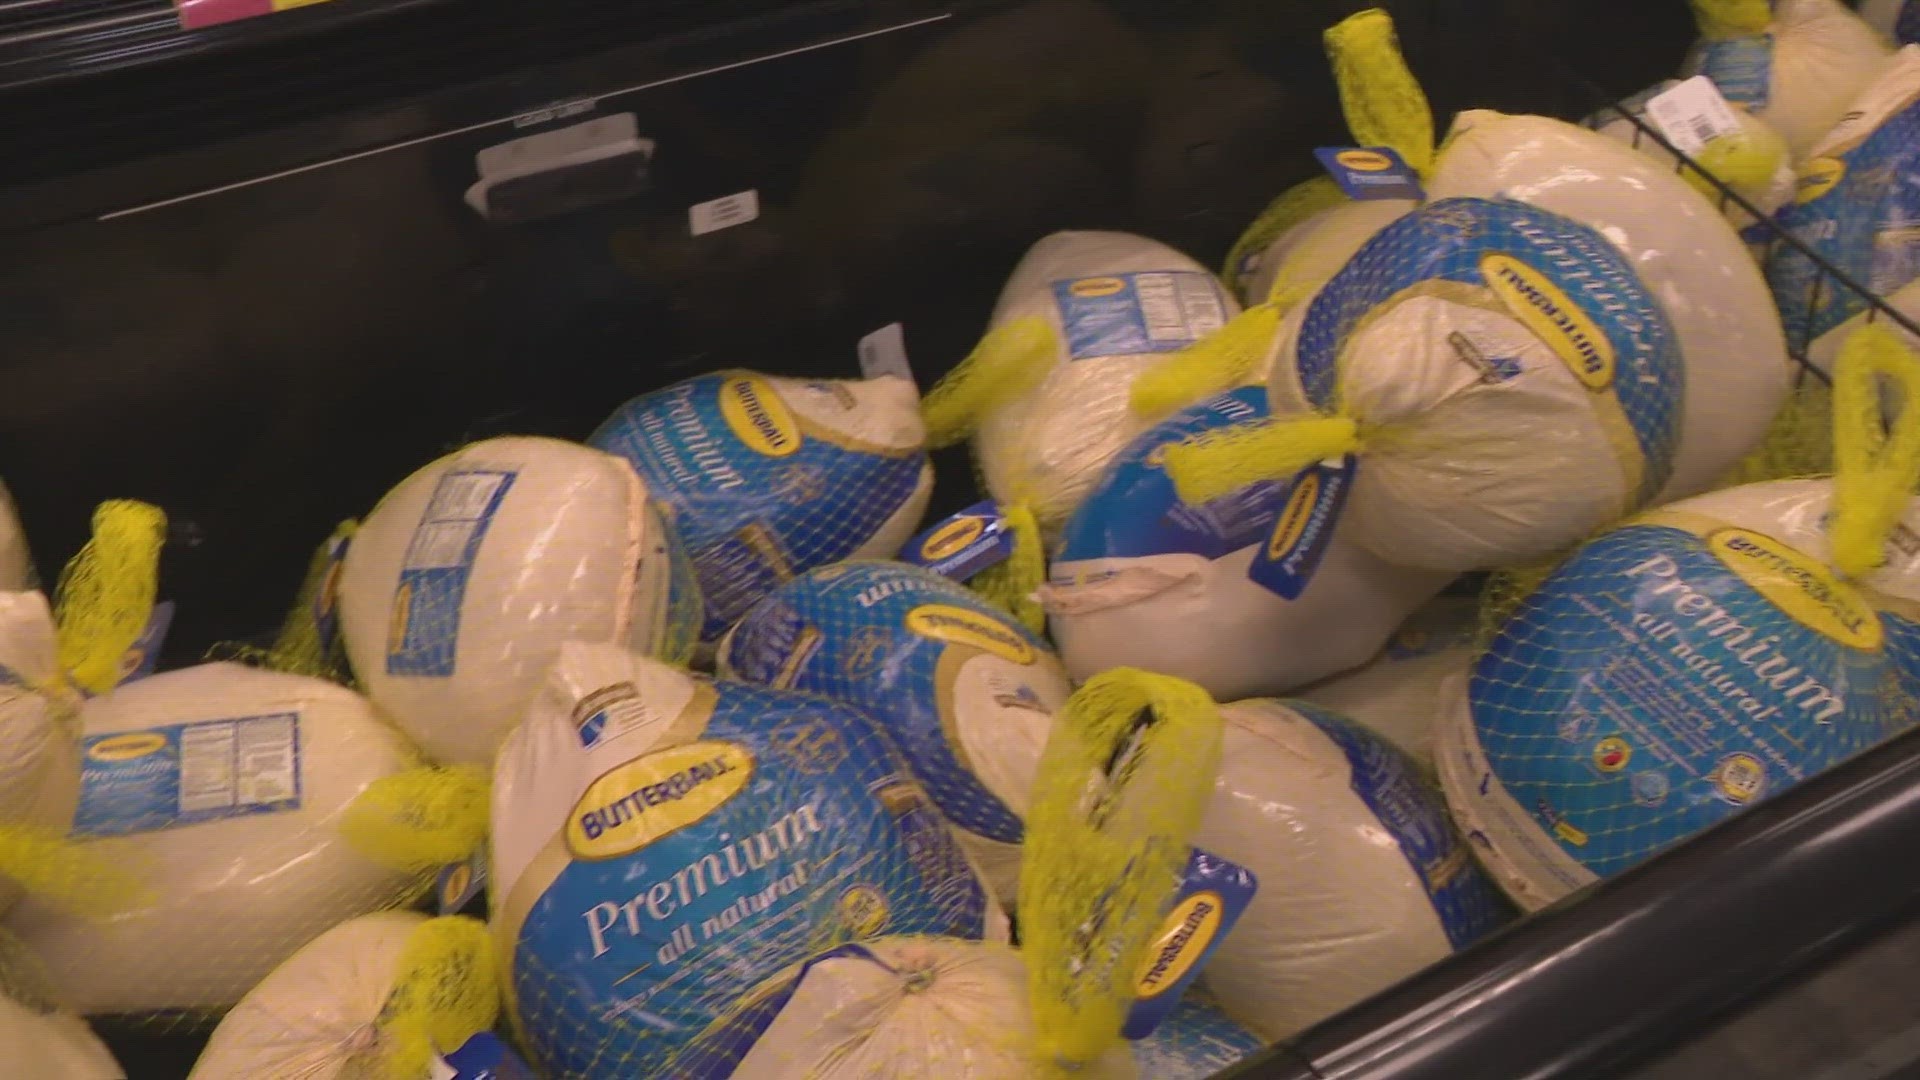 The Arizona Farm Bureau says the average cost of a Thanksgiving dinner for 10 is $51.89. But can we get a turkey and all the fixings for that cost? Here's our test